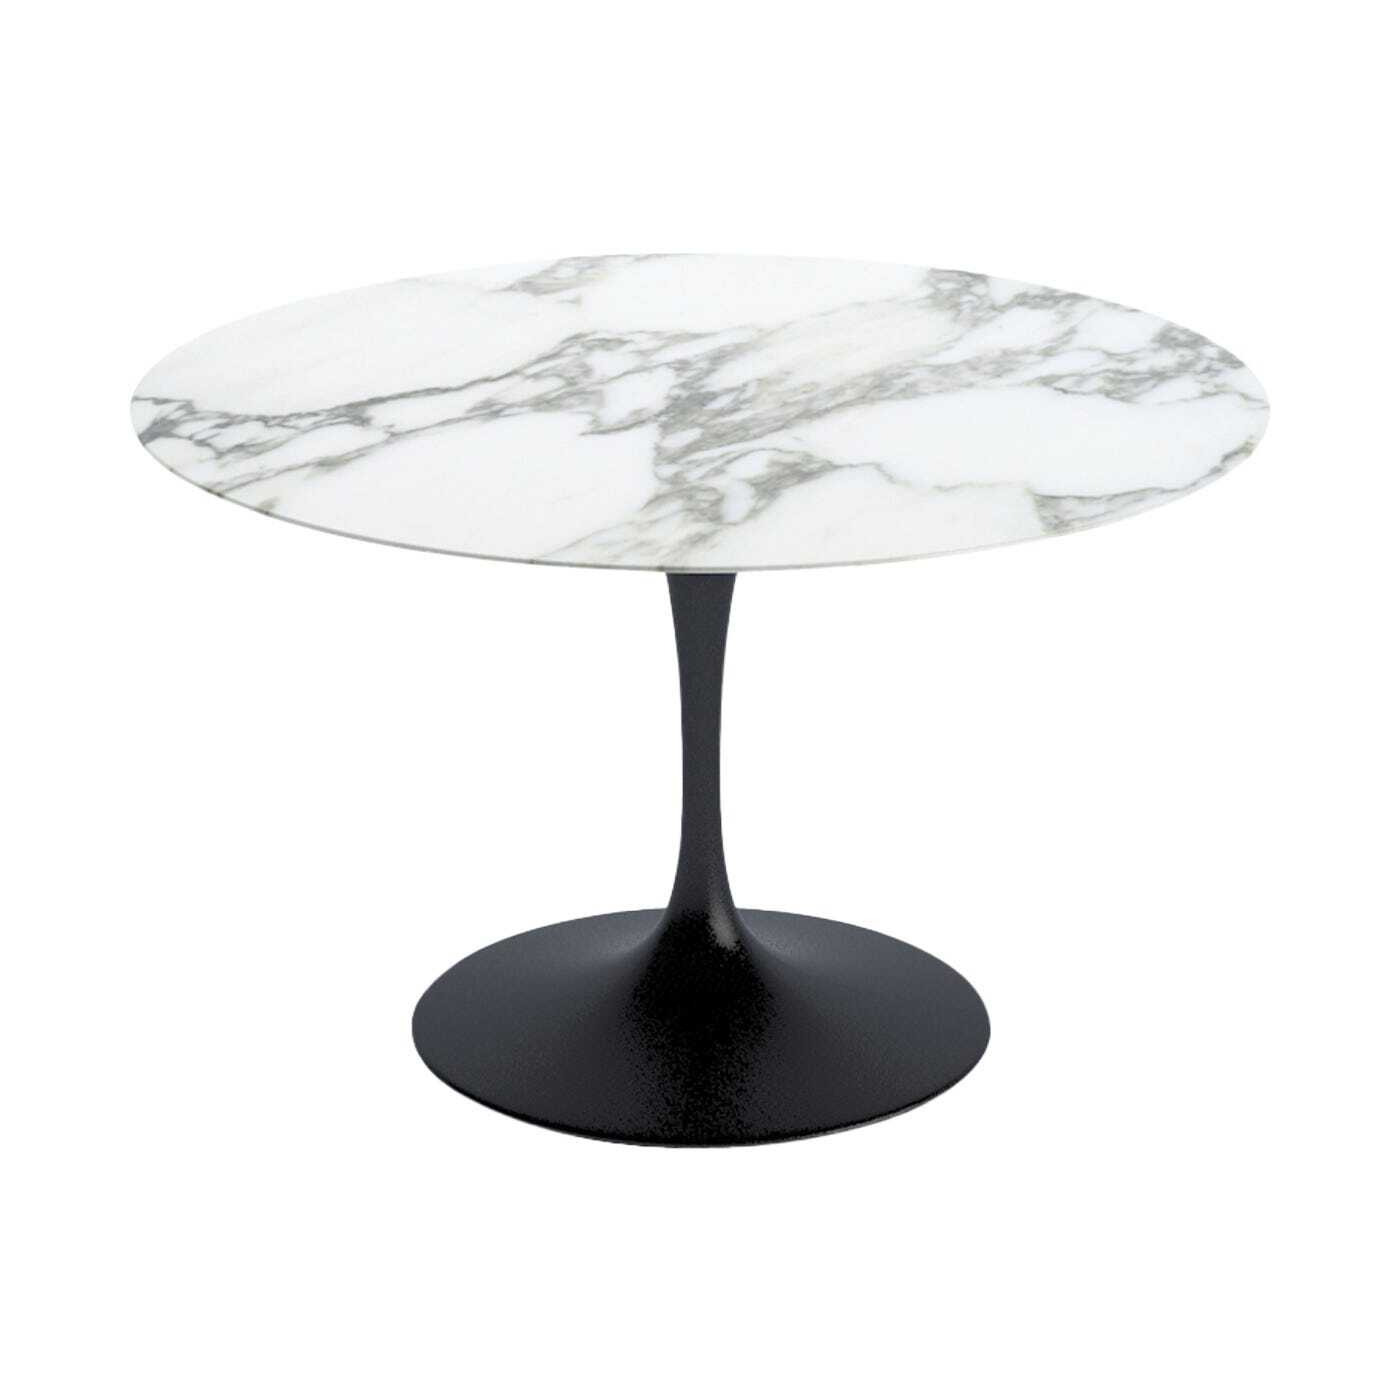 Knoll Saarinen Dining Table with Black Base in Arabescato 120cm - image 1